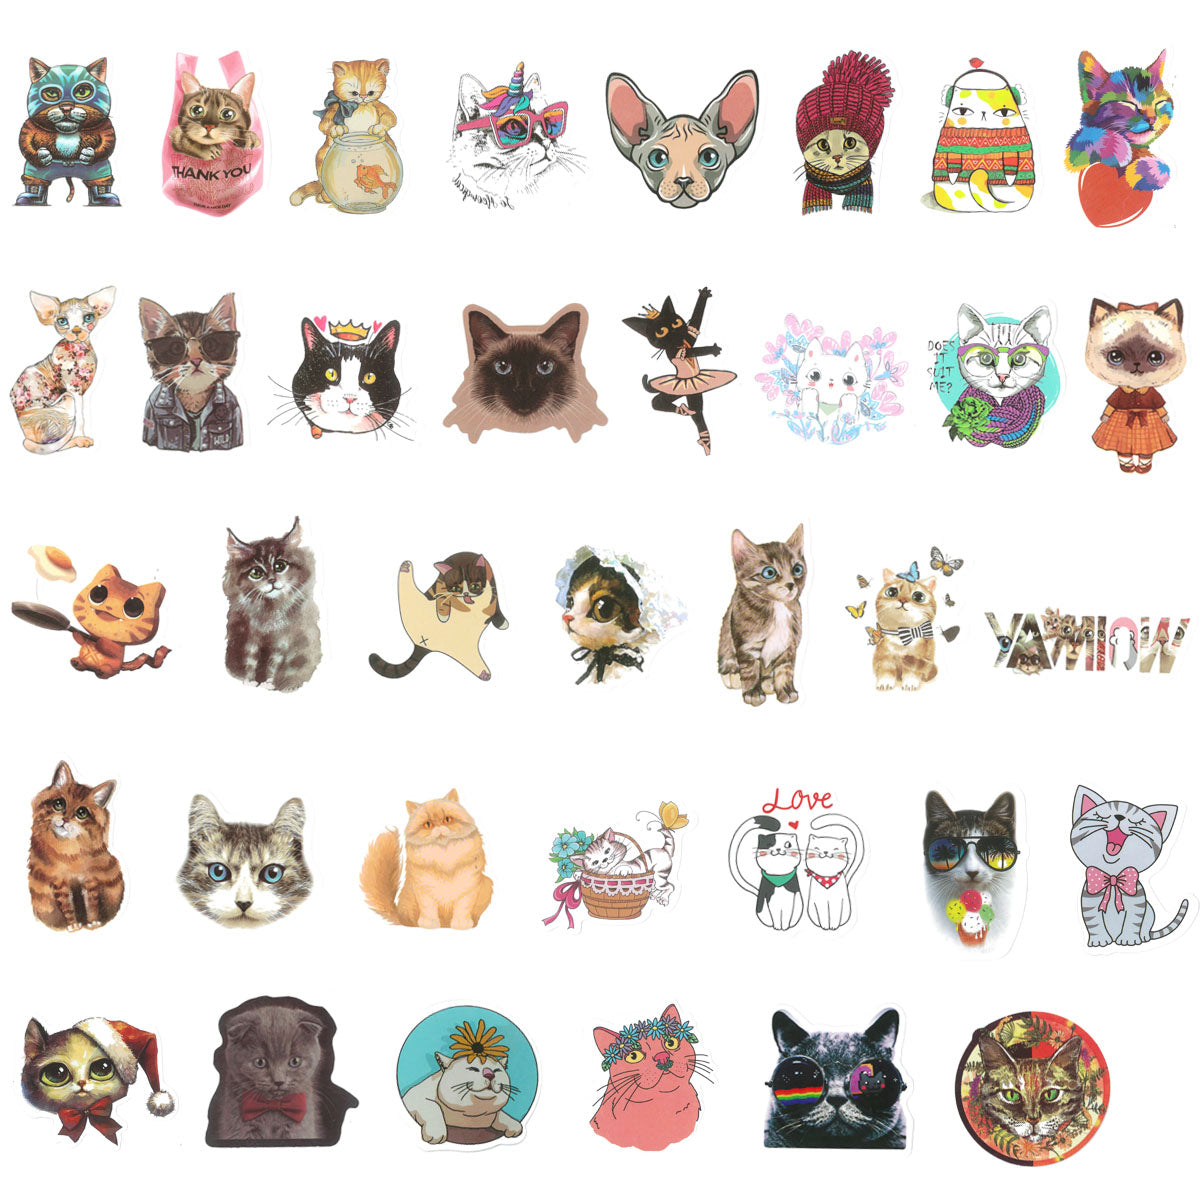 100 Pcs Cute Cat Stickers for Water Bottles| Gifts for Kids Teen Birthday Party| Kawaii Stickers Pack|Waterproof Stickers for Water Bottles,Laptop